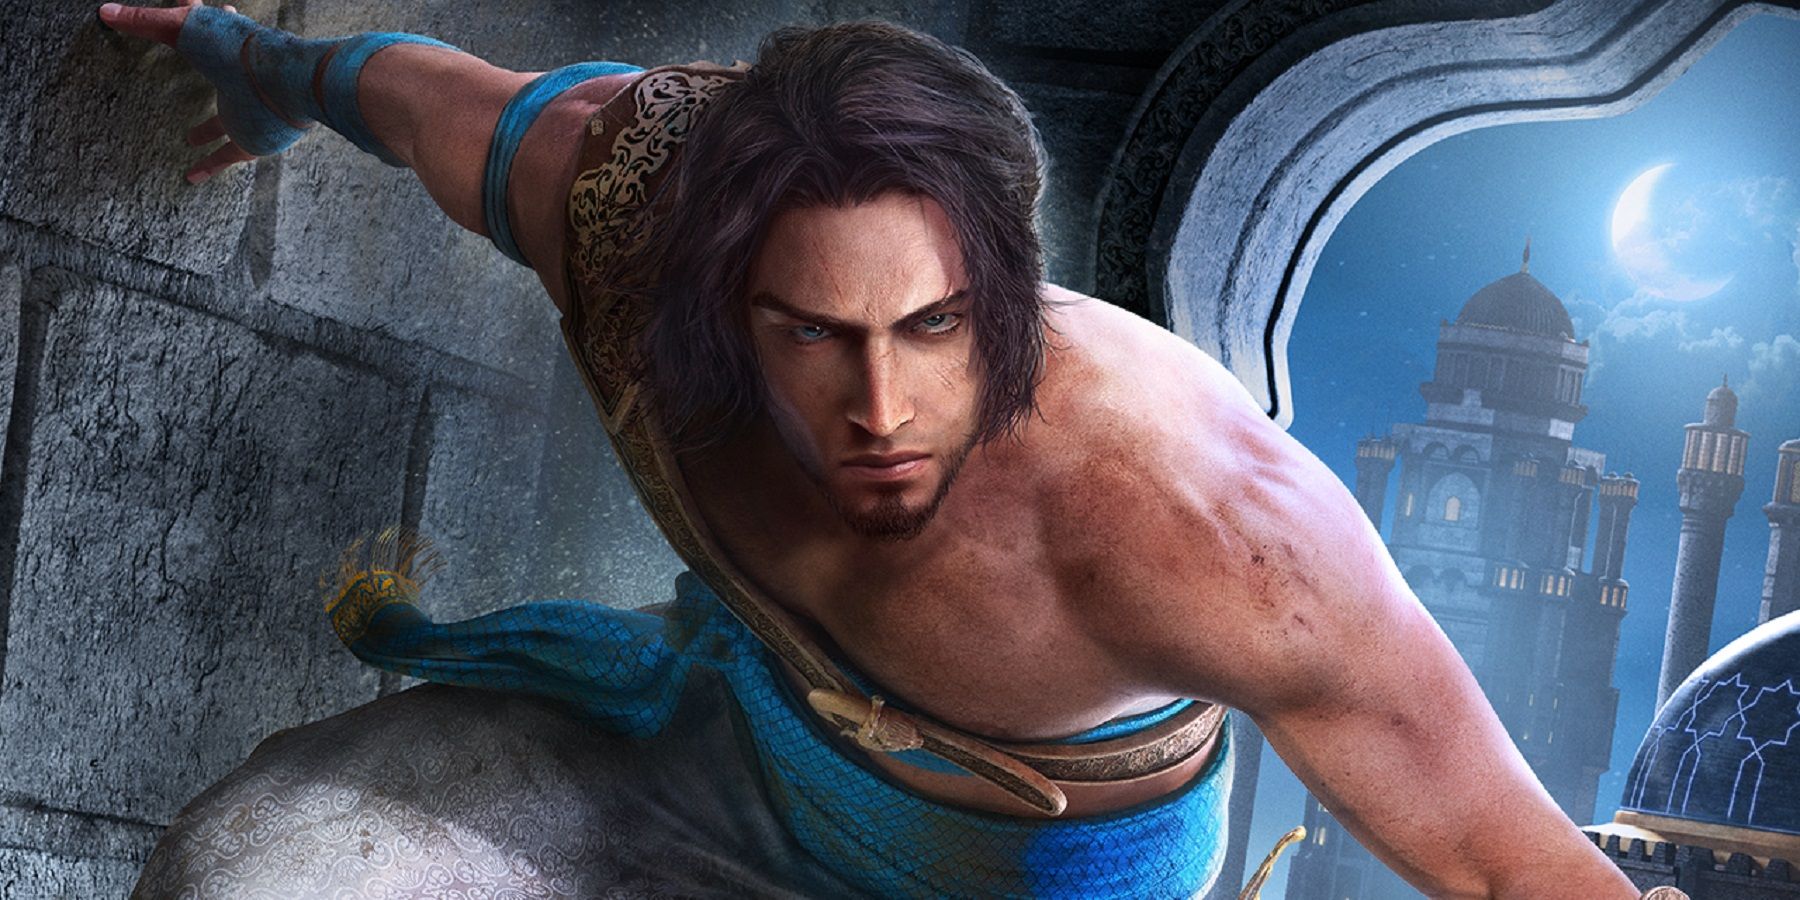 prince of persia 6 pc game release date